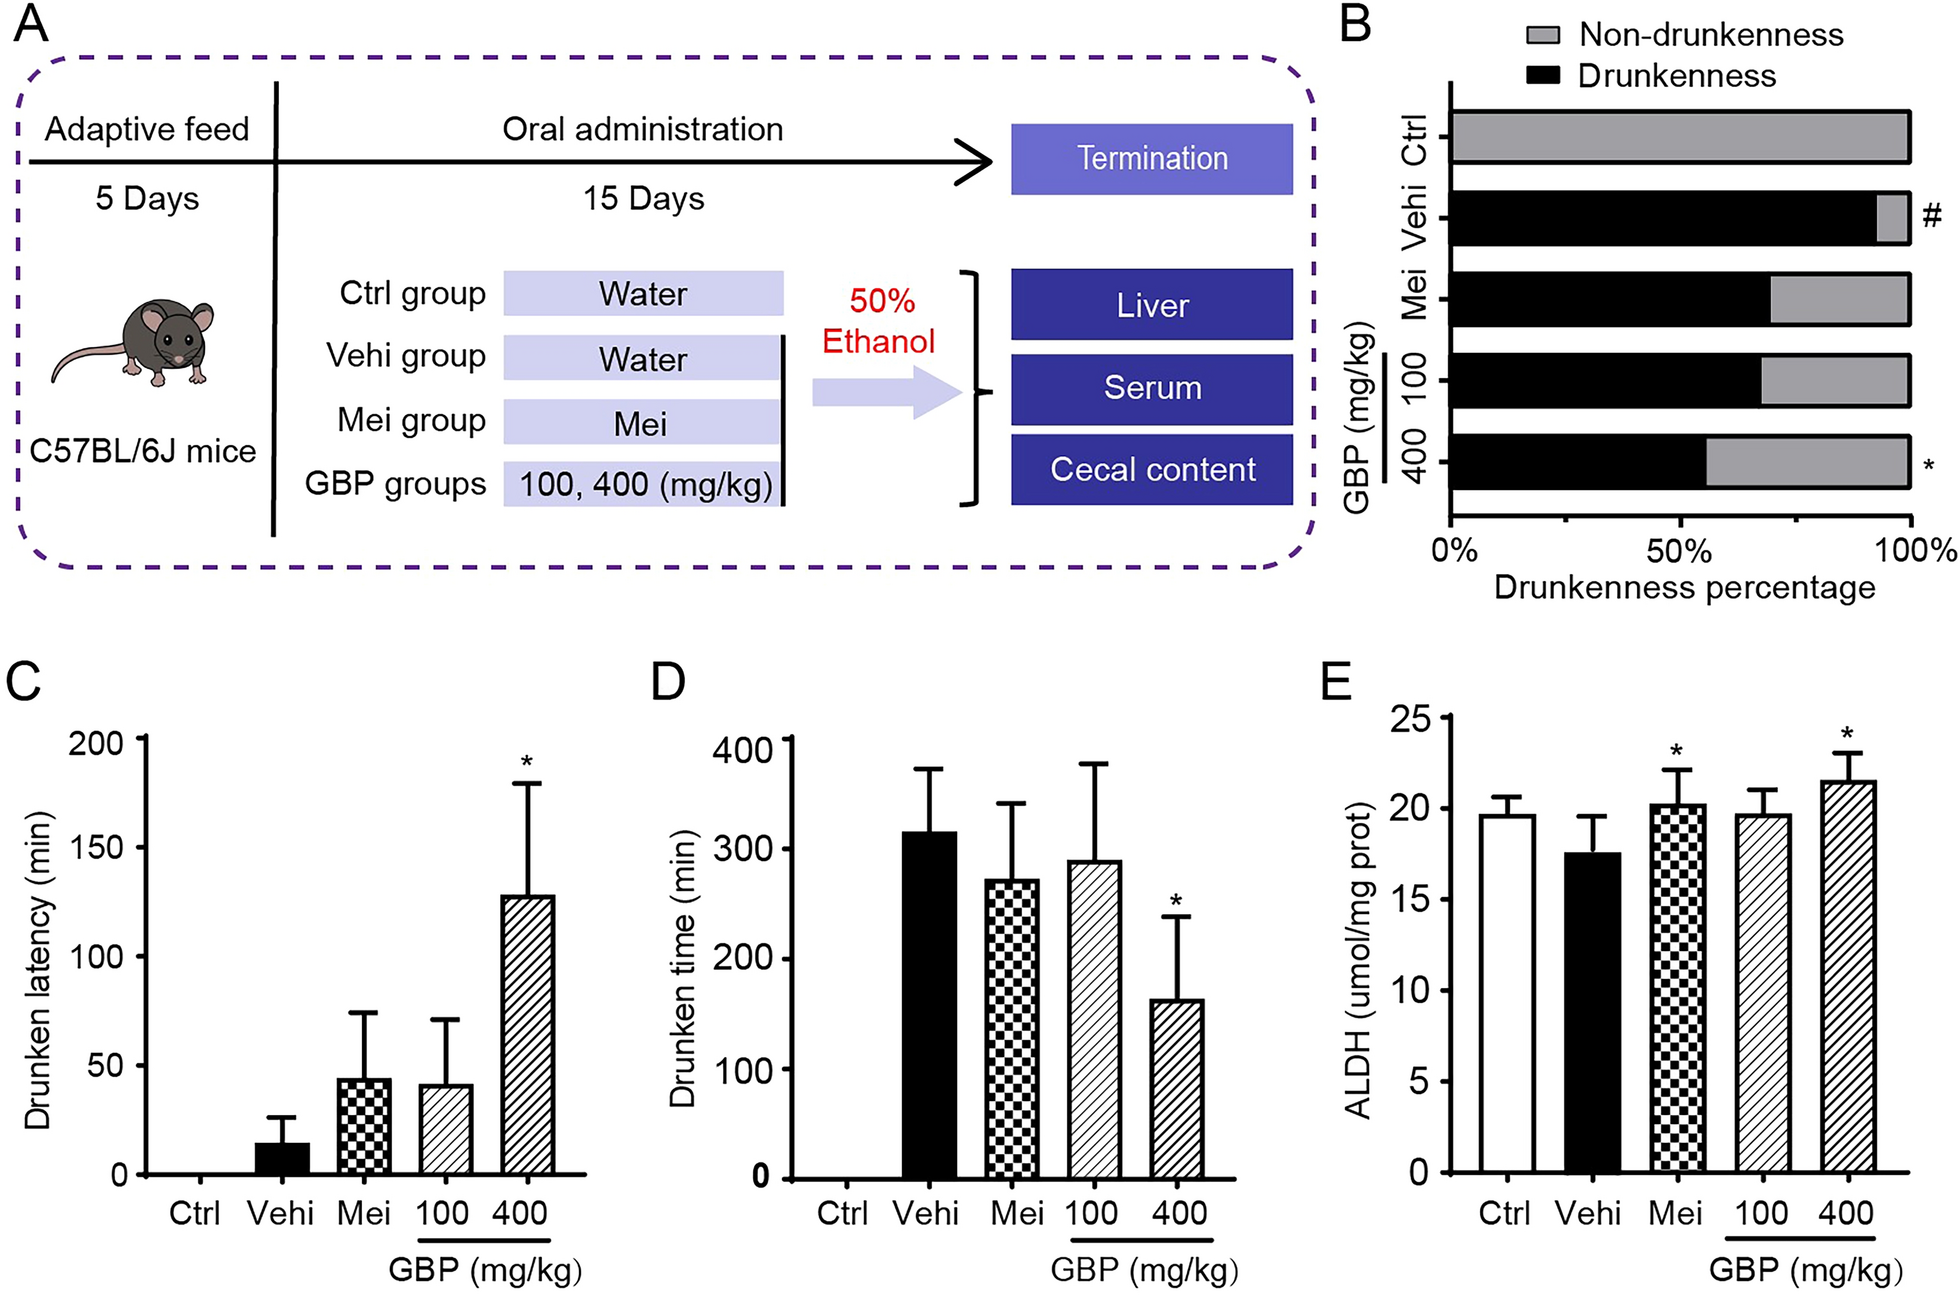 Golden bile powder prevents drunkenness and alcohol-induced liver injury in mice via the gut microbiota and metabolic modulation